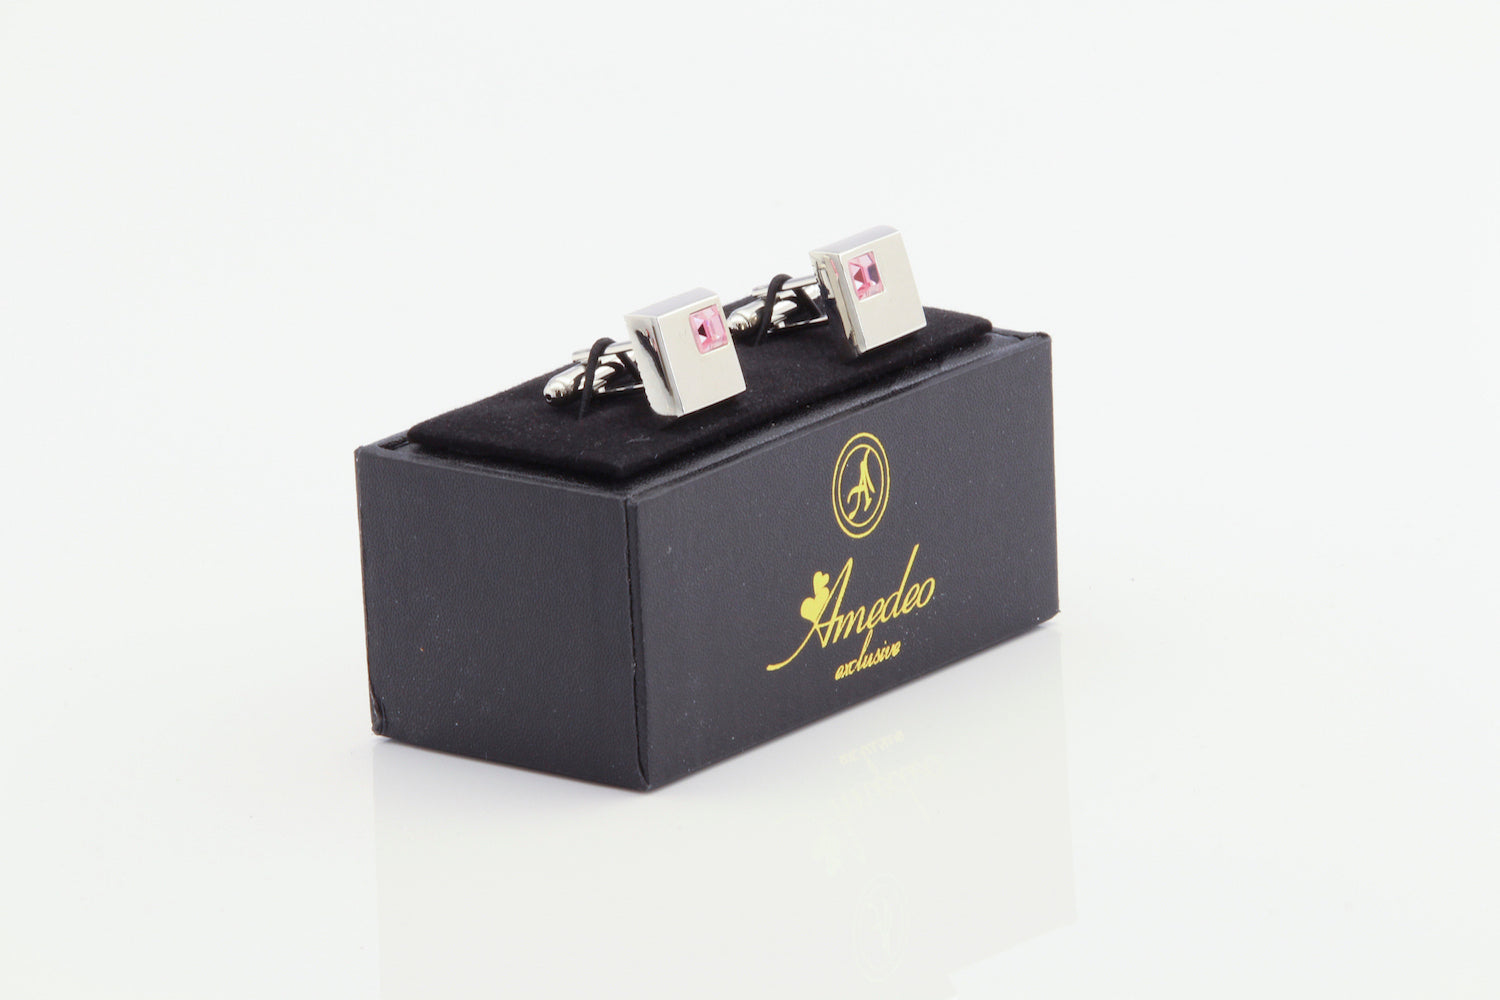 Silver Small Pink Mens Stainless Steel Square Cufflinks for Shirt with Box - Hand Crafted Perfect